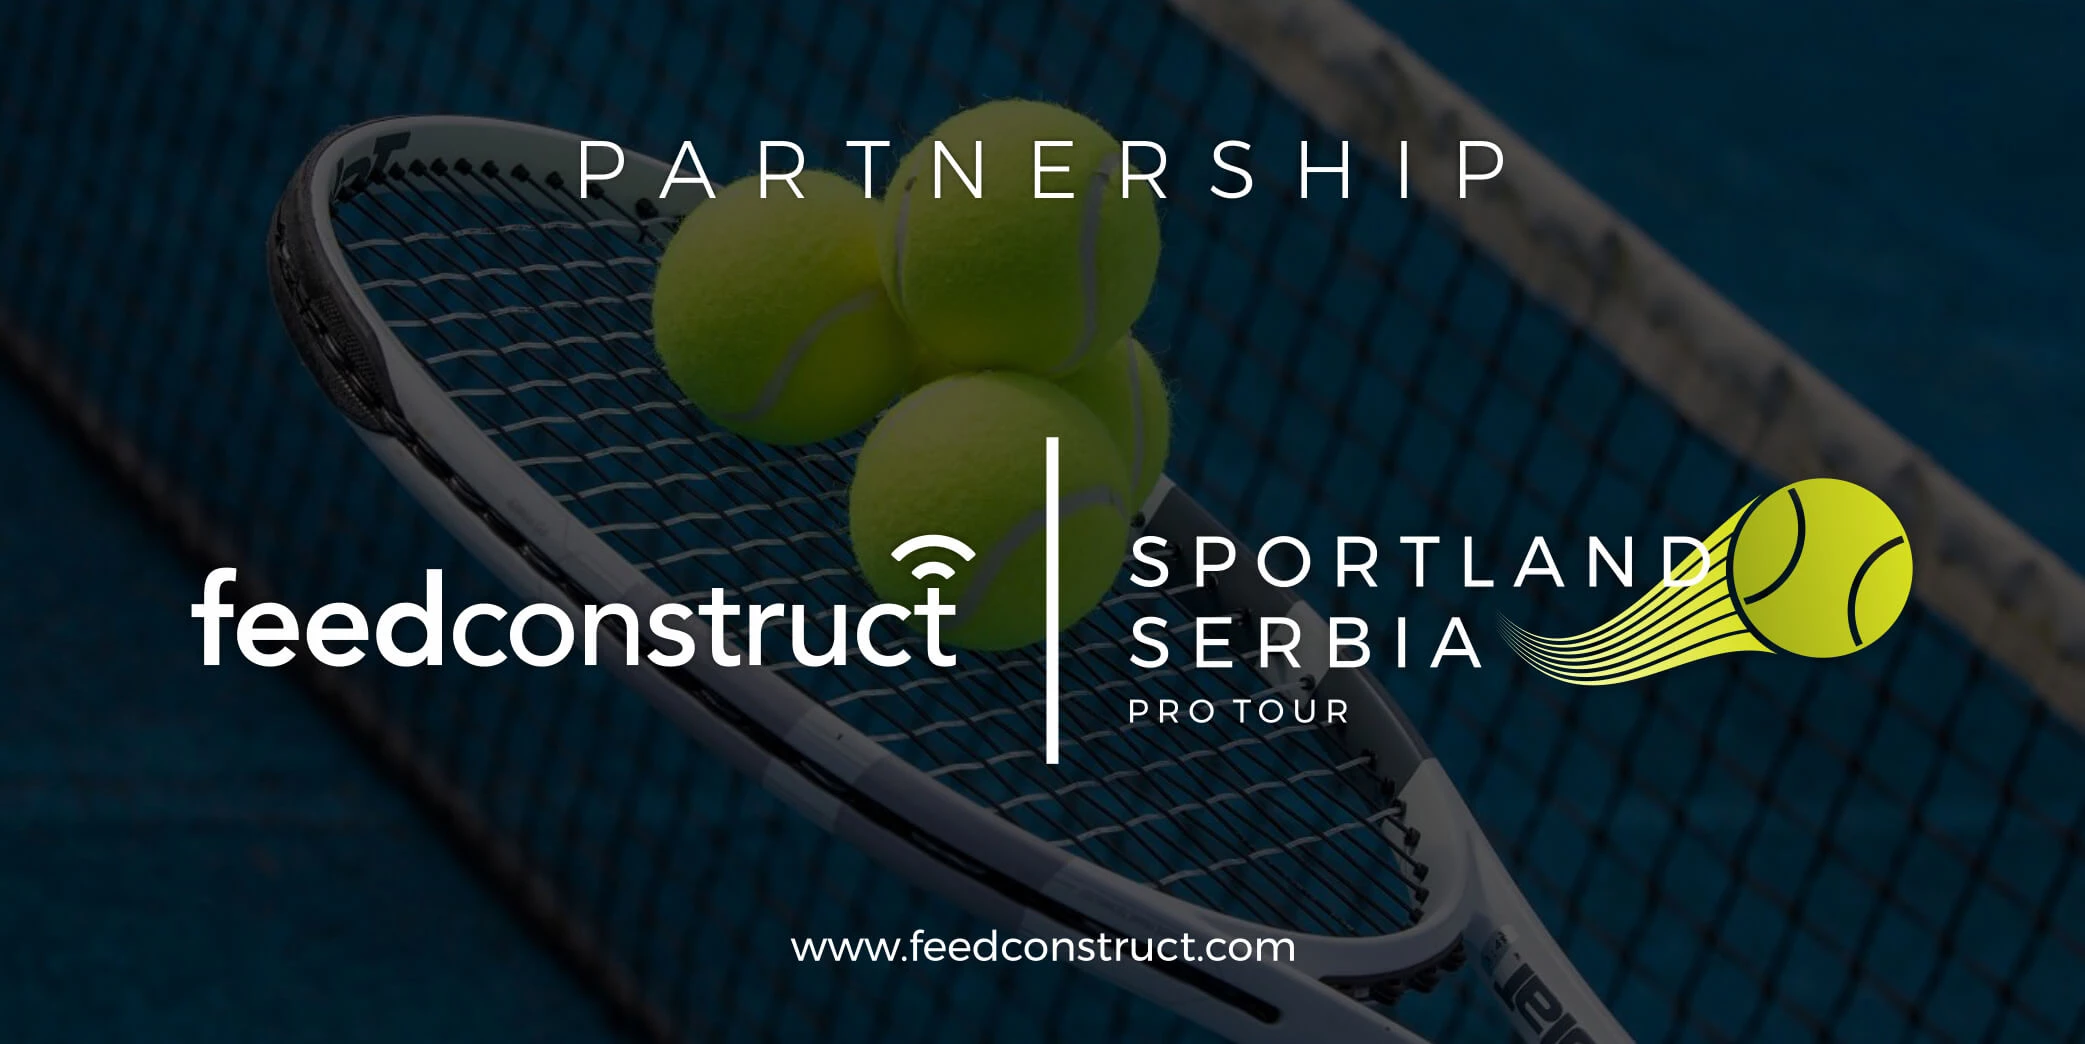 FeedConstruct signs an exclusive deal with the Sportland Serbia Pro Tour